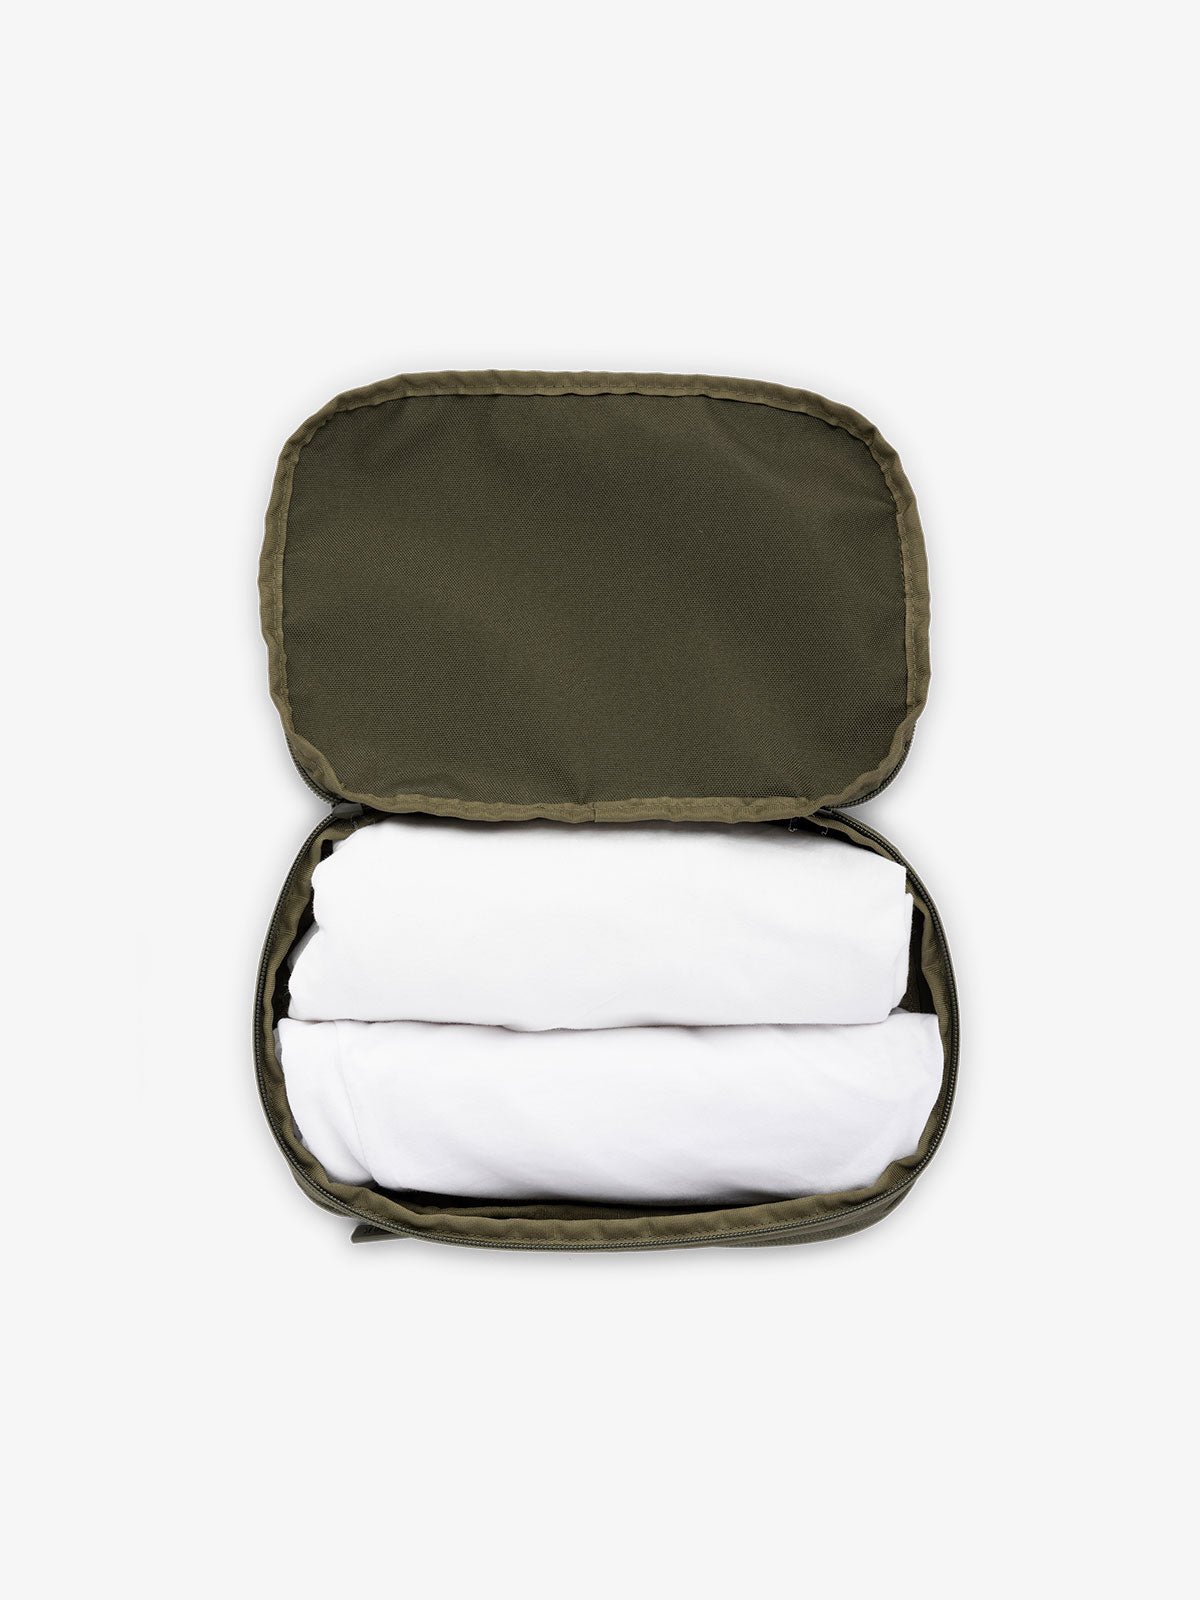 CALPAK small packing cubes for travel made with durable material in moss